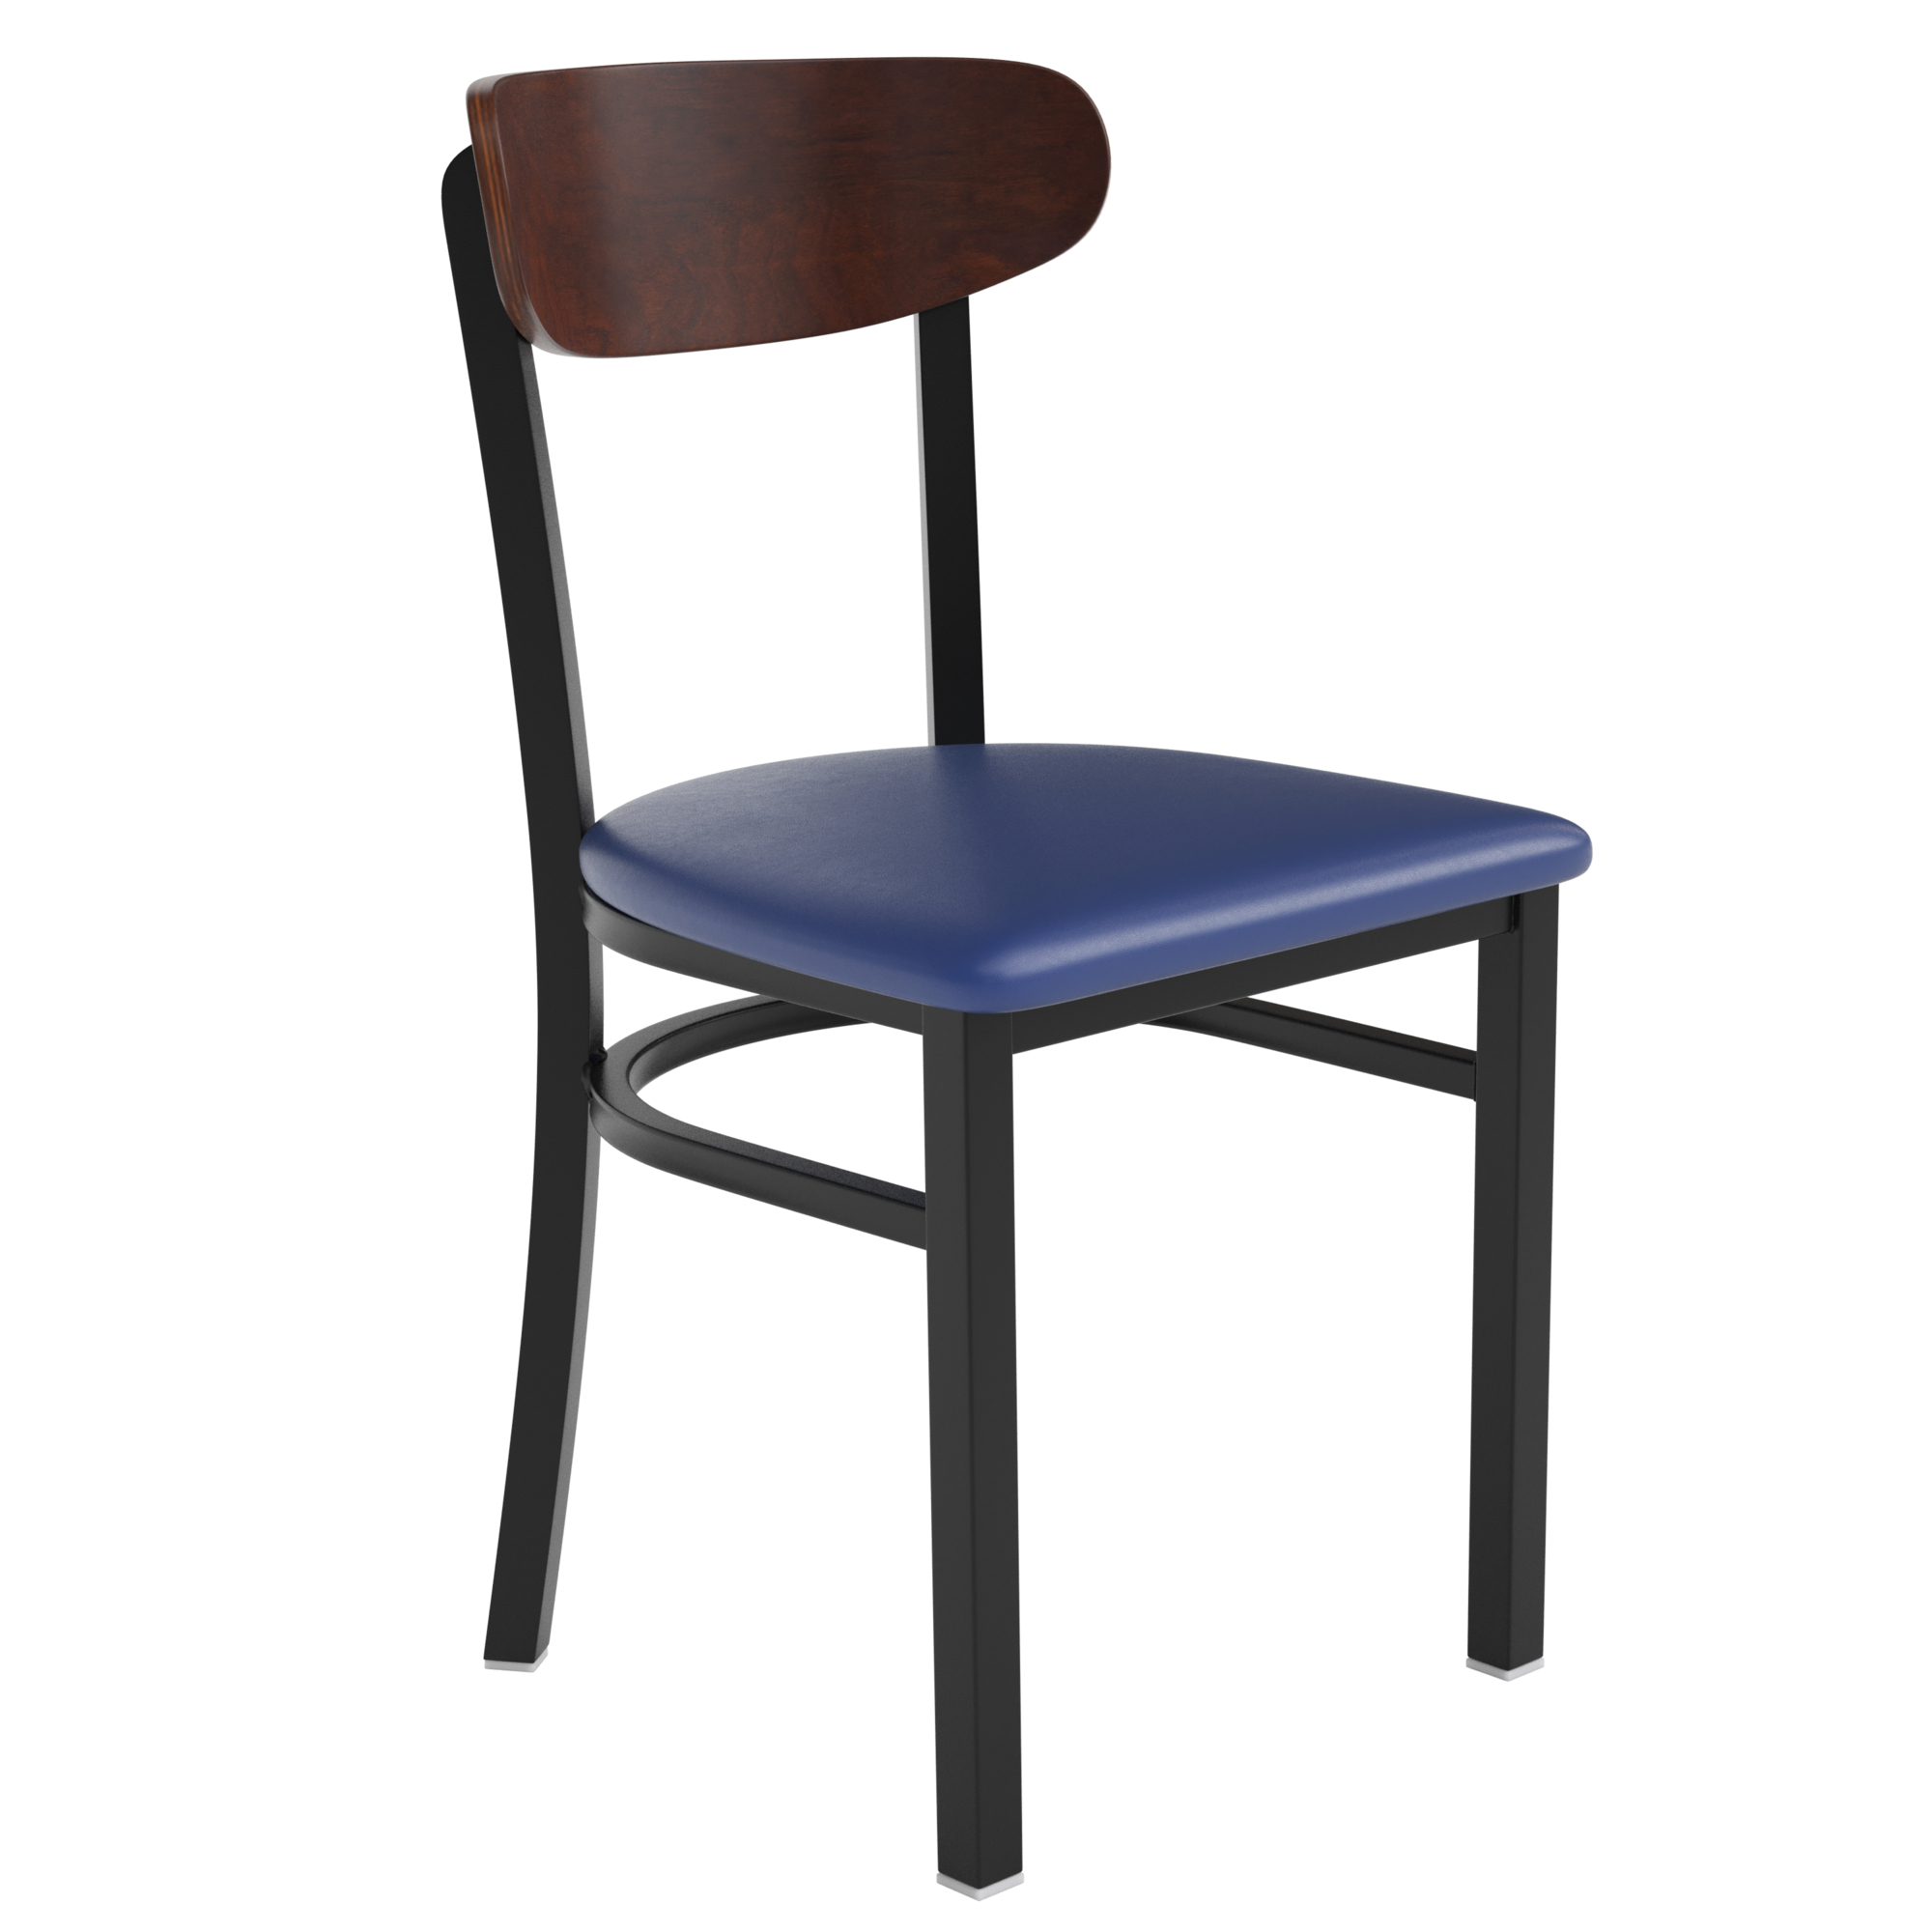 Flash Furniture, Blue Vinyl Seat Dining Chair with Walnut Wood Back, Primary Color Blue, Included (qty.) 1, Model XUDG6V5BLVWAL